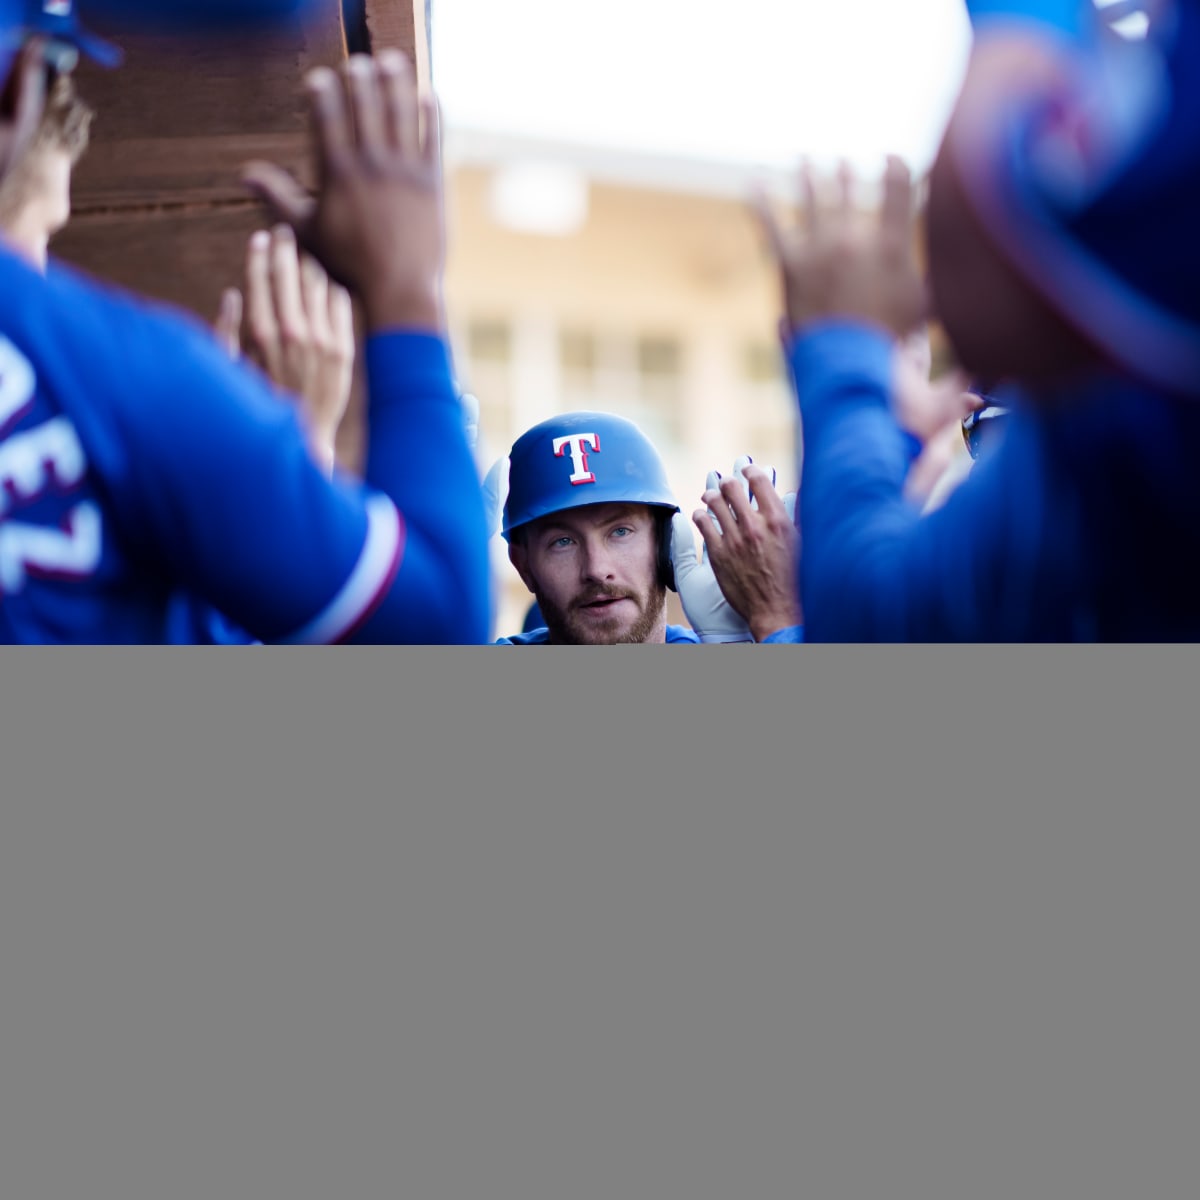 Rangers catcher Mitch Garver opts for surgery, spring return